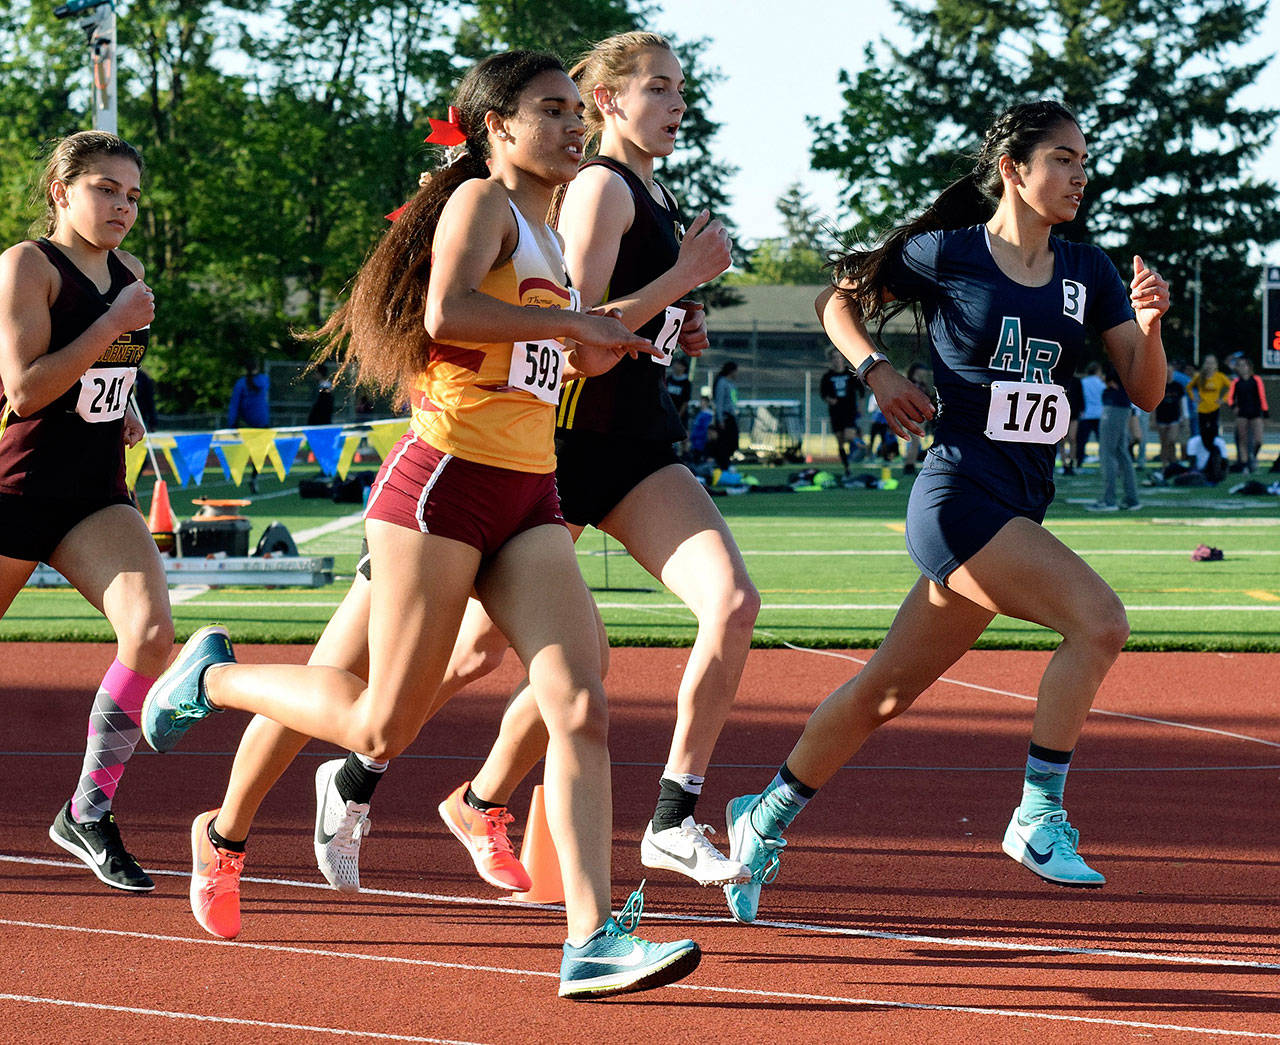 Auburn Riverside sophomore Jasmin Muneton, far right, paces the pack in the NPSL 3,200-meter final at Auburn Memorial Stadium on May 9. Muneton finished second in the race in 11 minutes, 46.07 seconds. She was seventh in the 1,600 at 5:26.93. RACHEL CIAMPI, Reporter